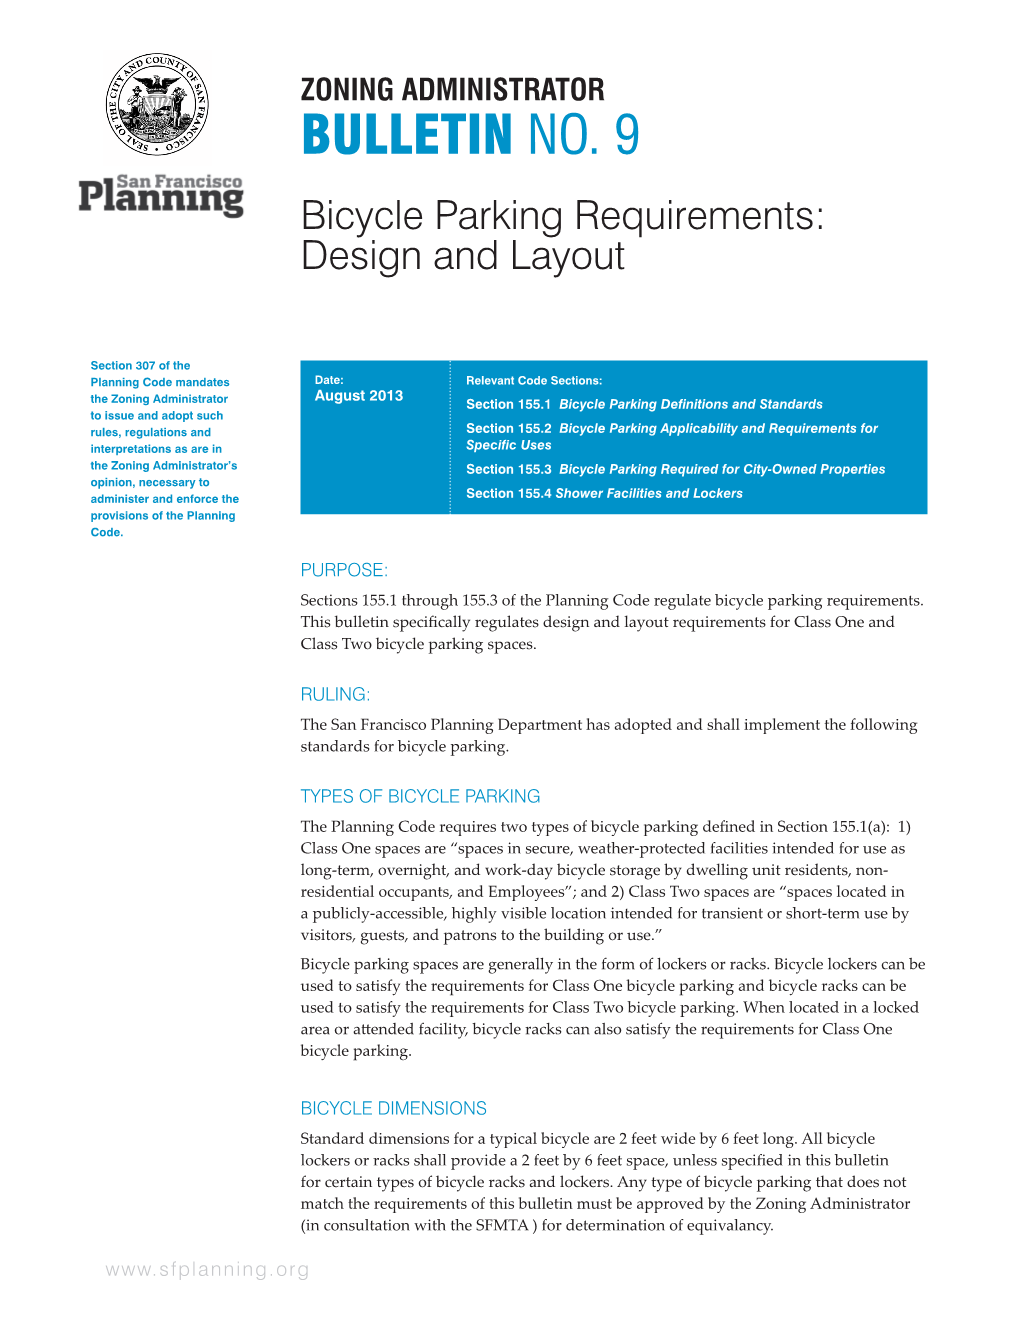 BULLETIN NO. 9 Bicycle Parking Requirements: Design and Layout